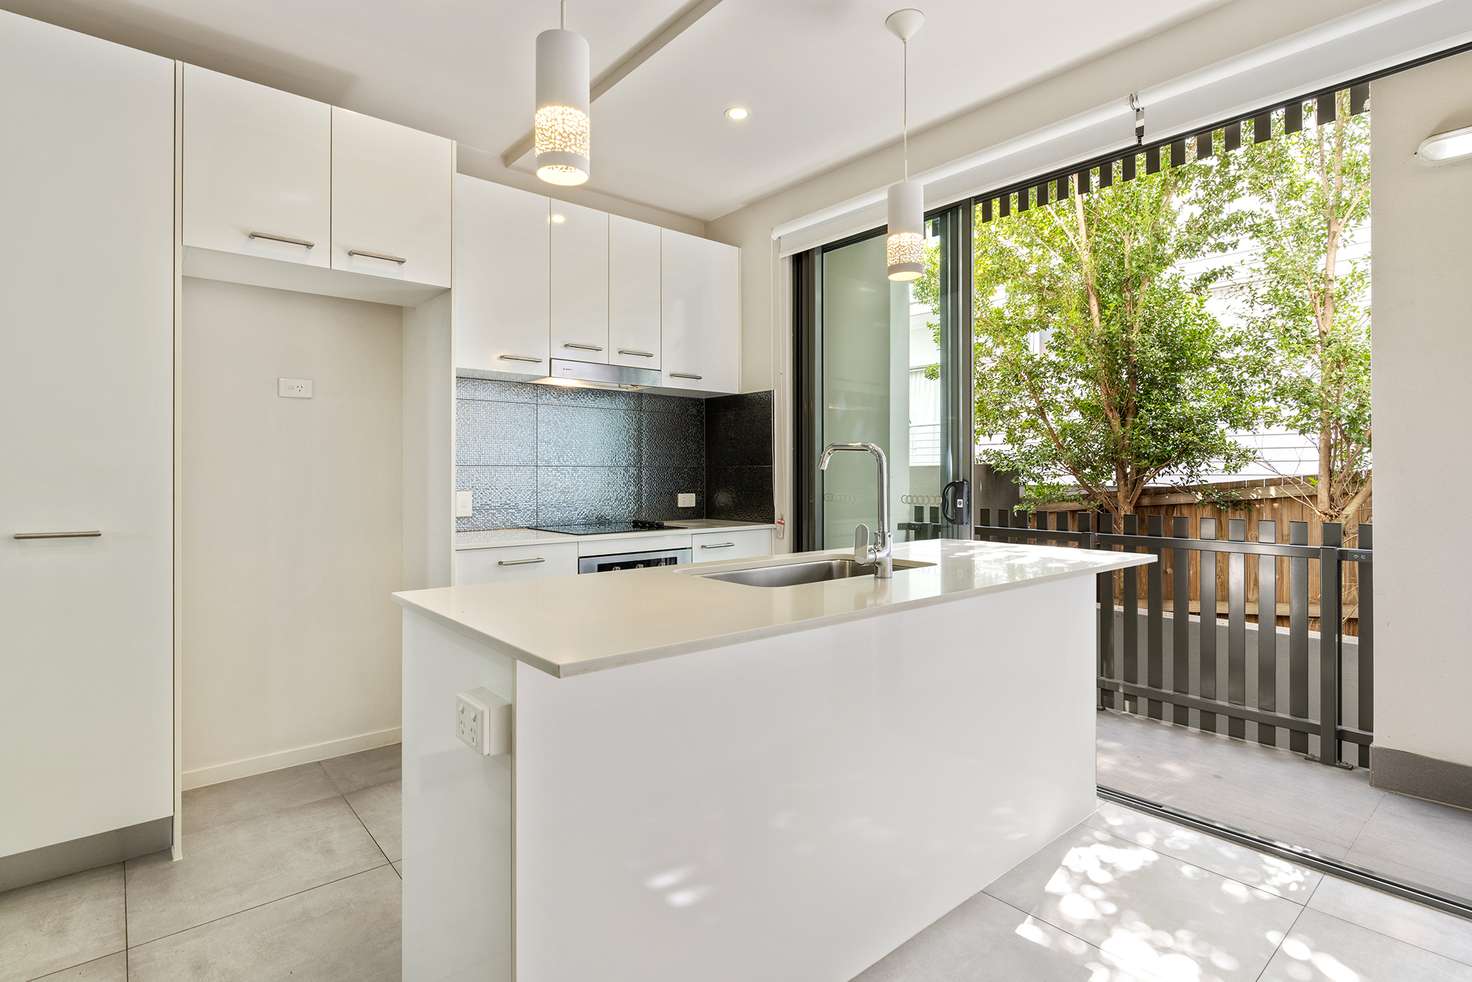 Main view of Homely apartment listing, 4/15 Lytton Road, Bulimba QLD 4171